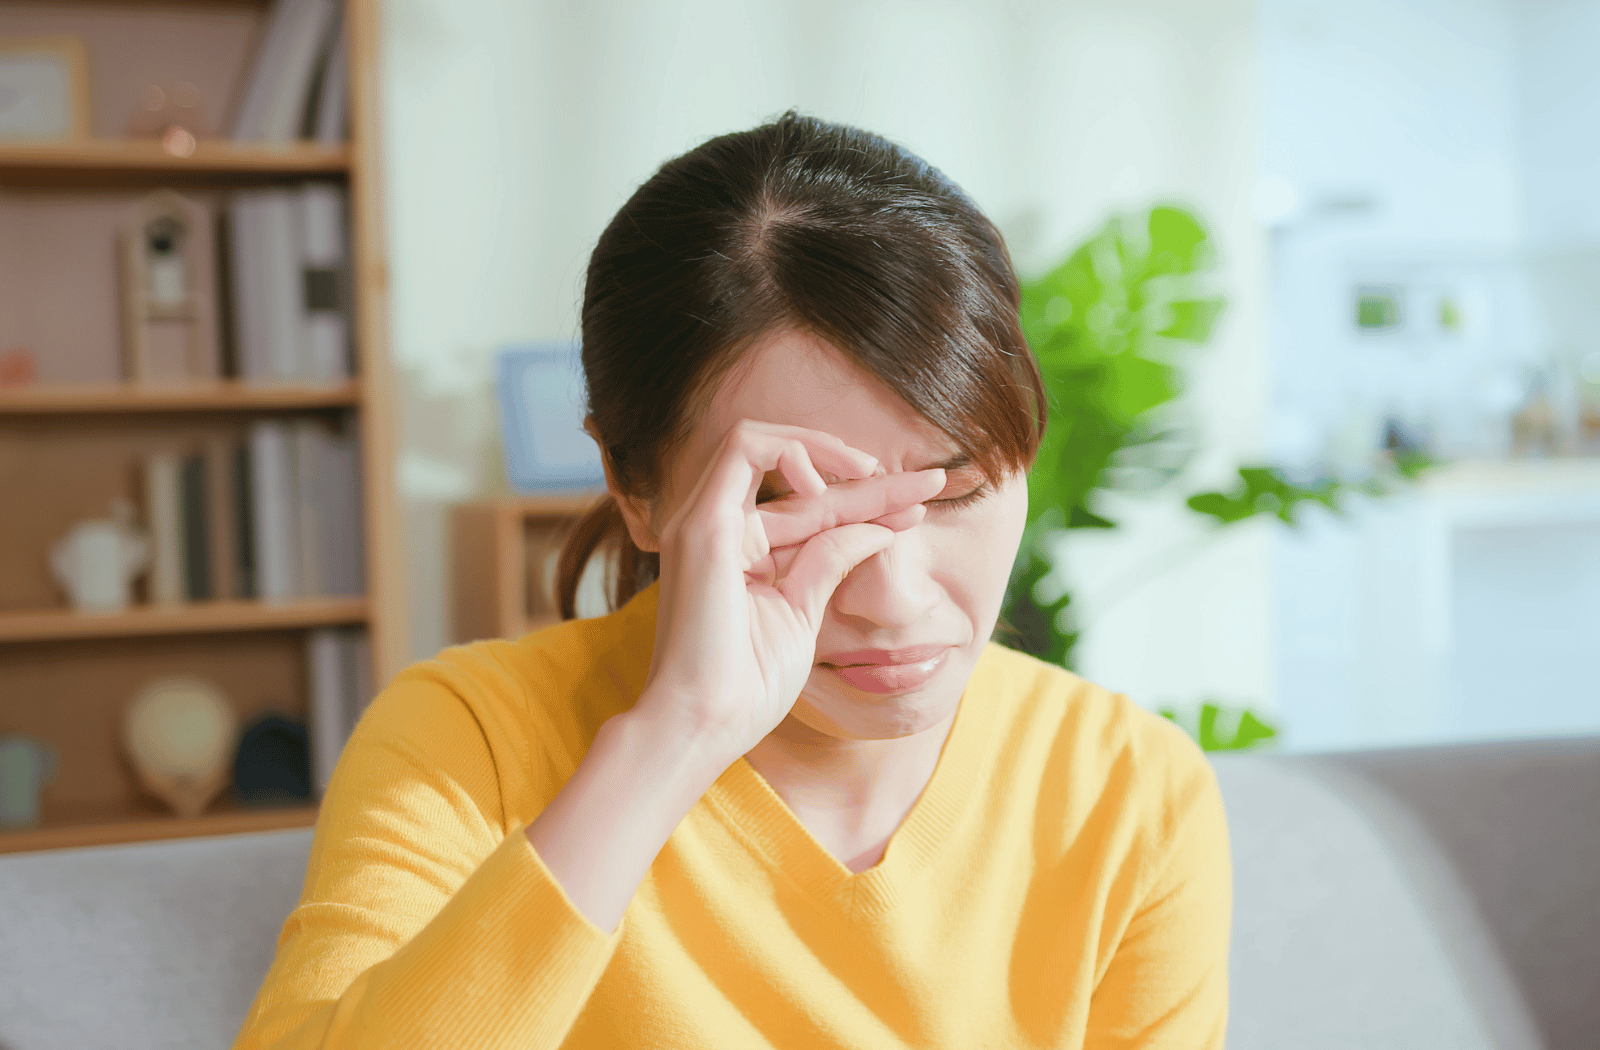 A woman closes and rubs her eyes due to dry eye pain